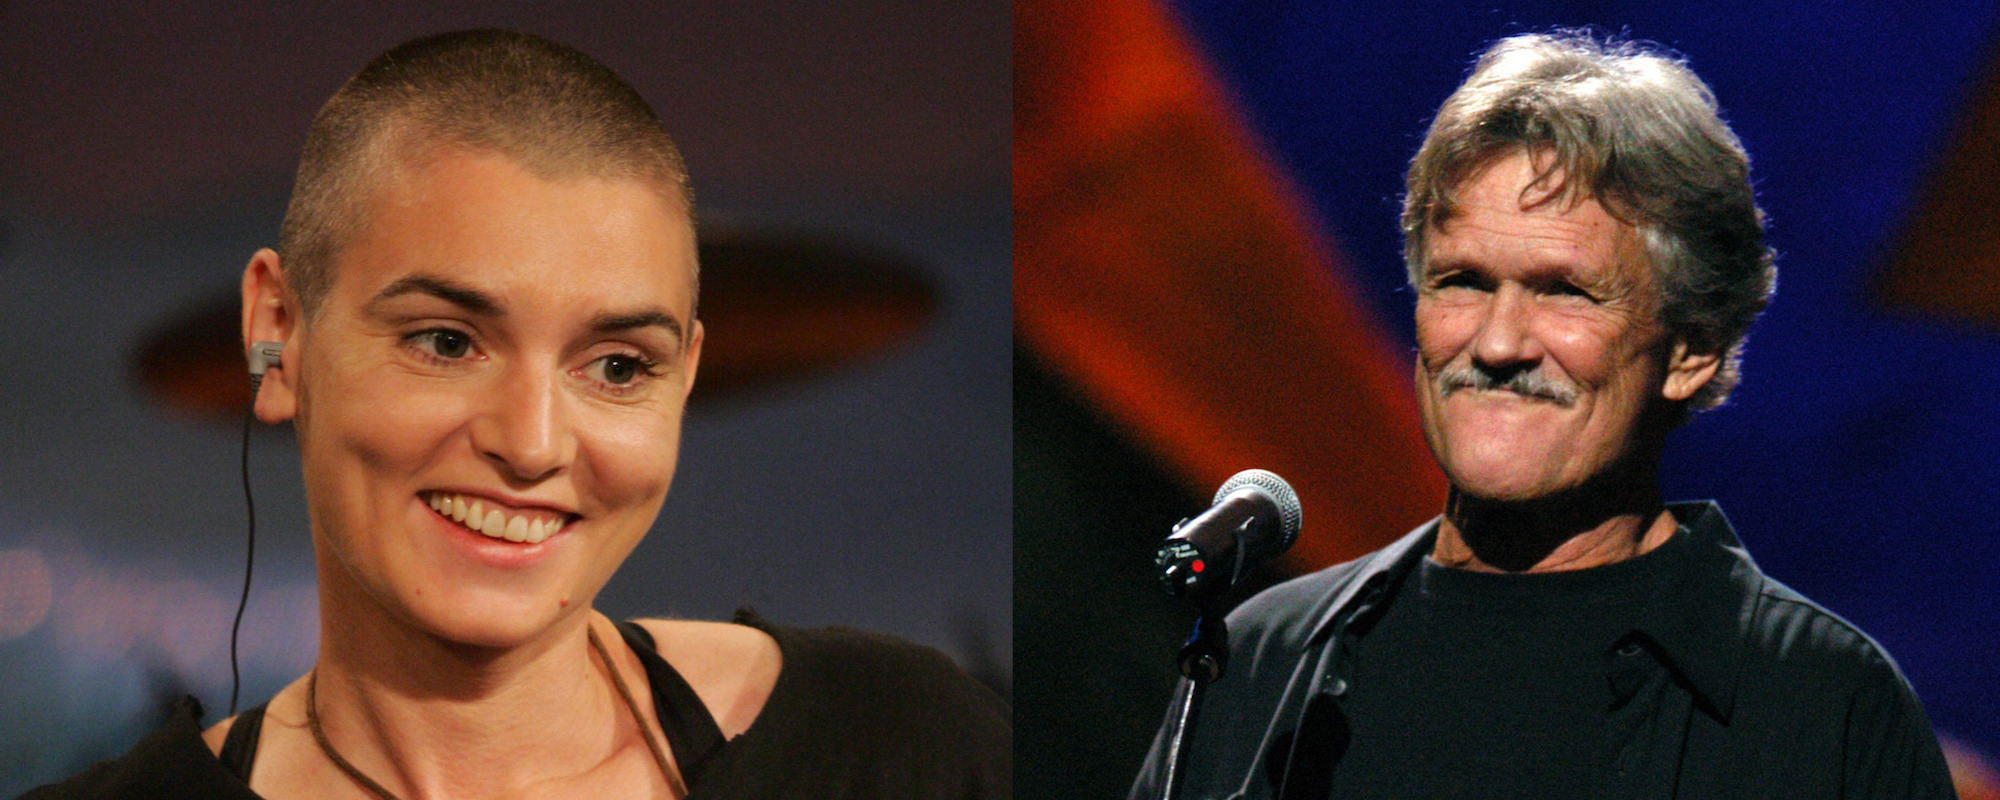 Remember When: Kris Kristofferson Defended Sinéad O’Connor, and Their Unlikely Friendship